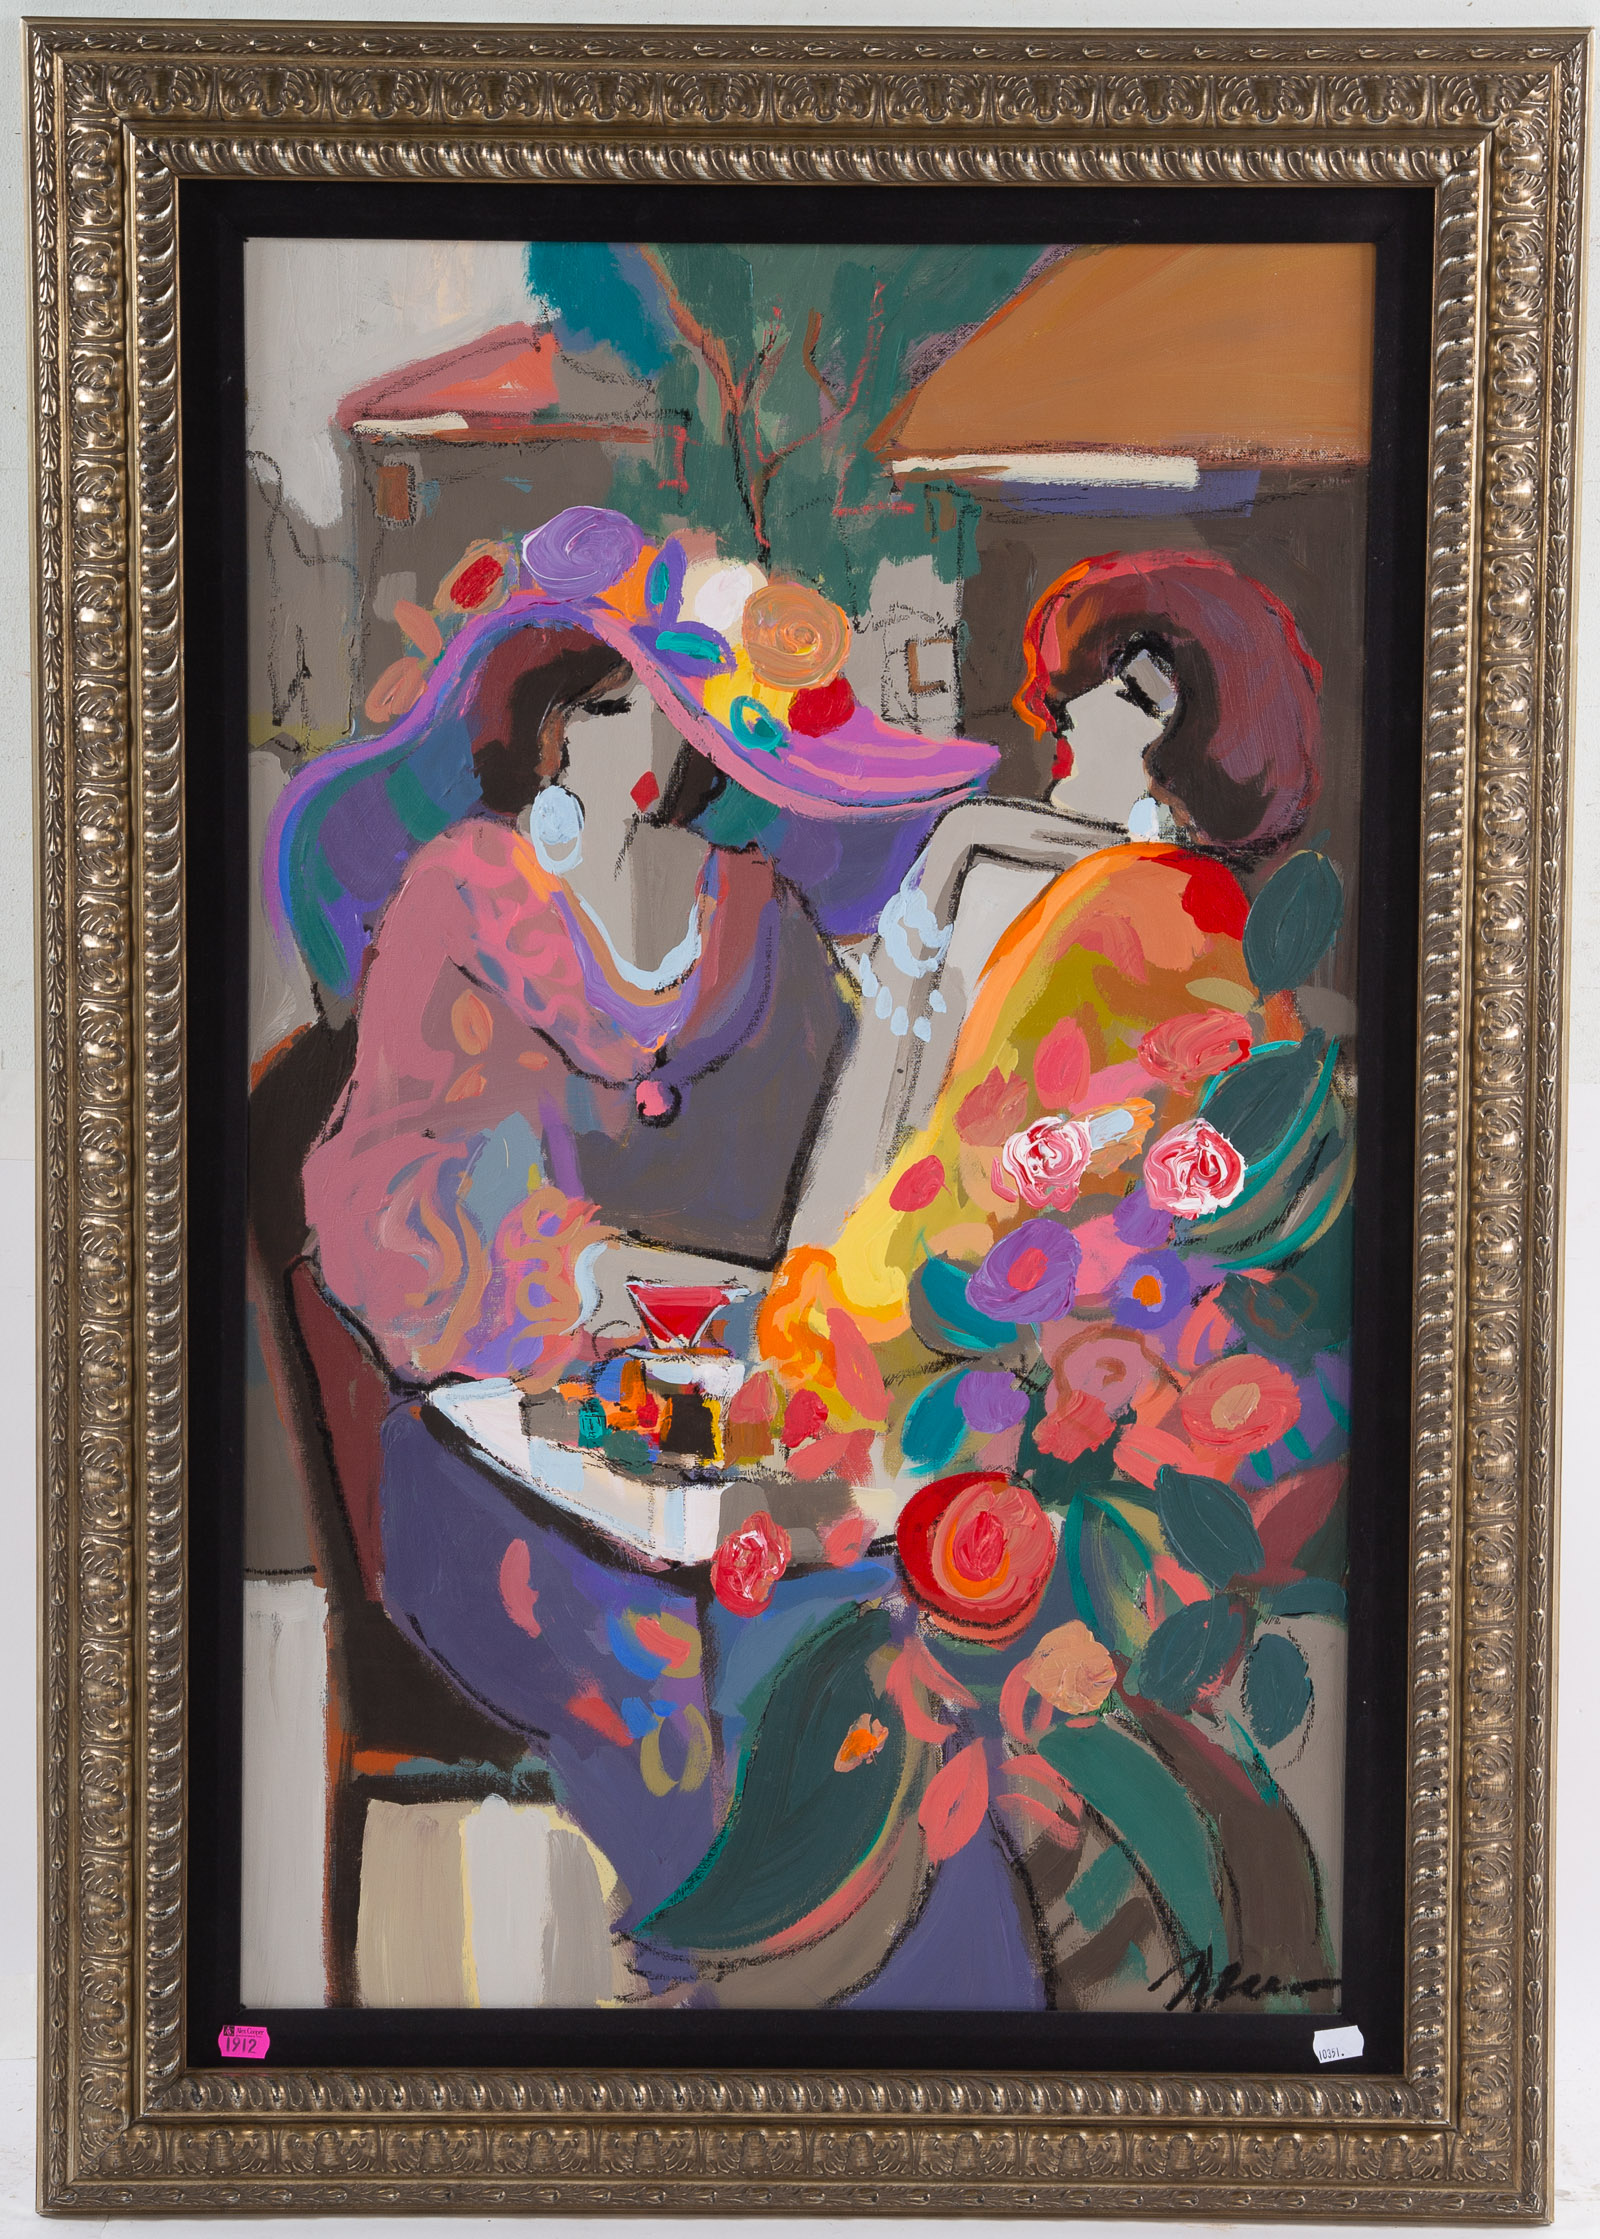 ISAAC MAIMON FLOWERS IN YOUR 3381a5